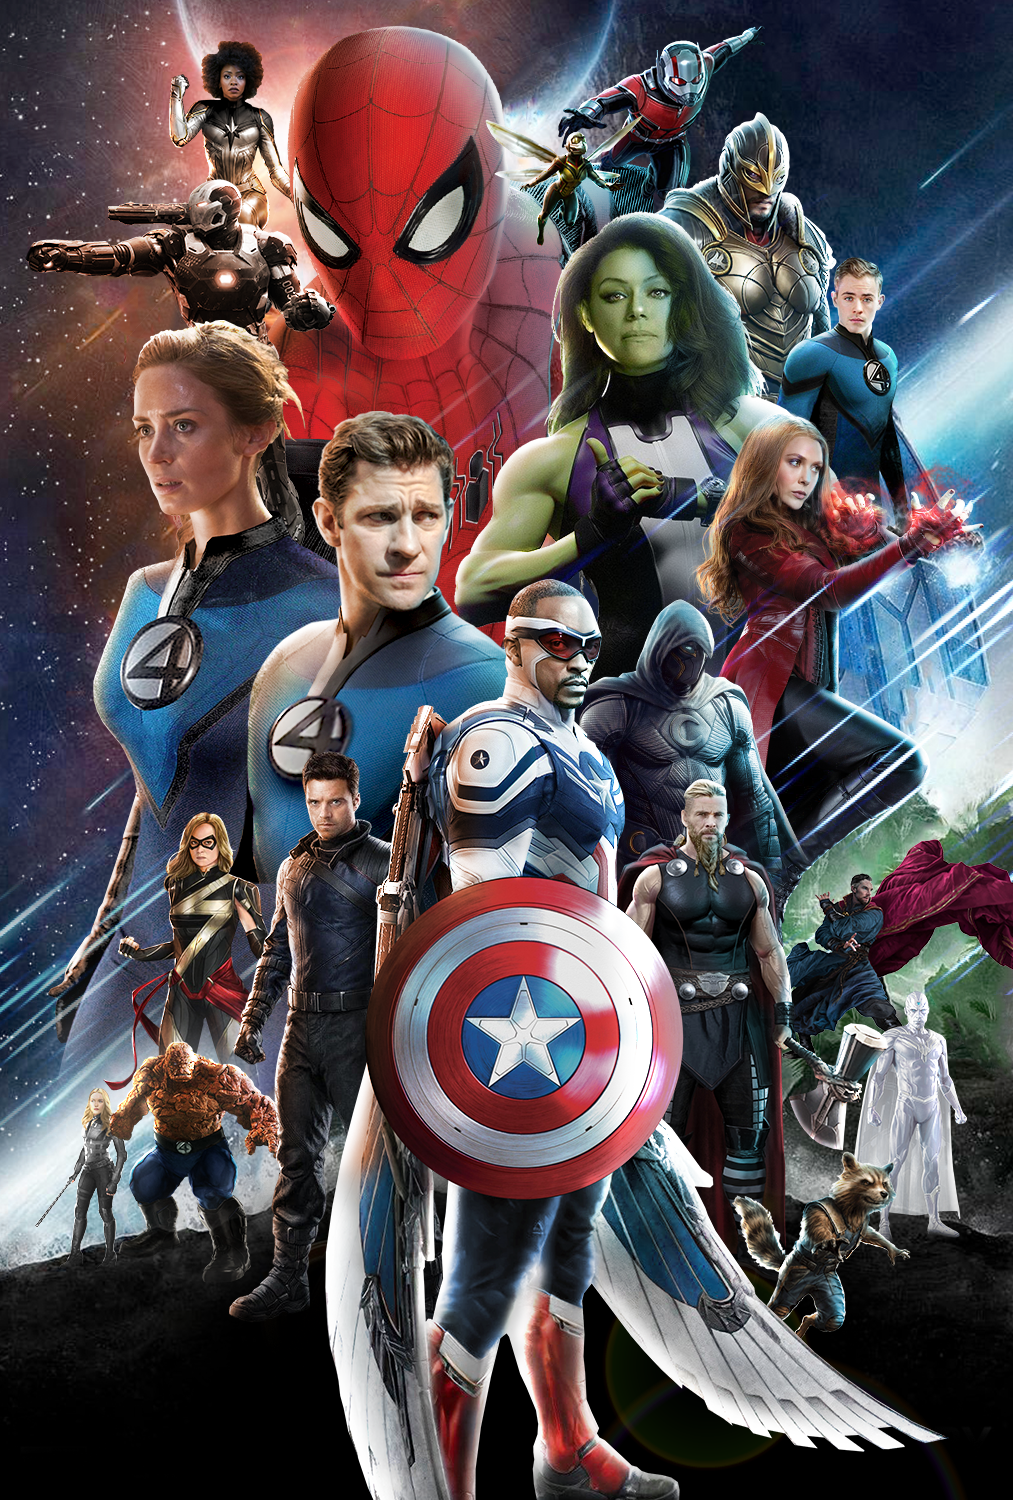 Box Office Rewind: A History of the Marvel Cinematic Universe (So